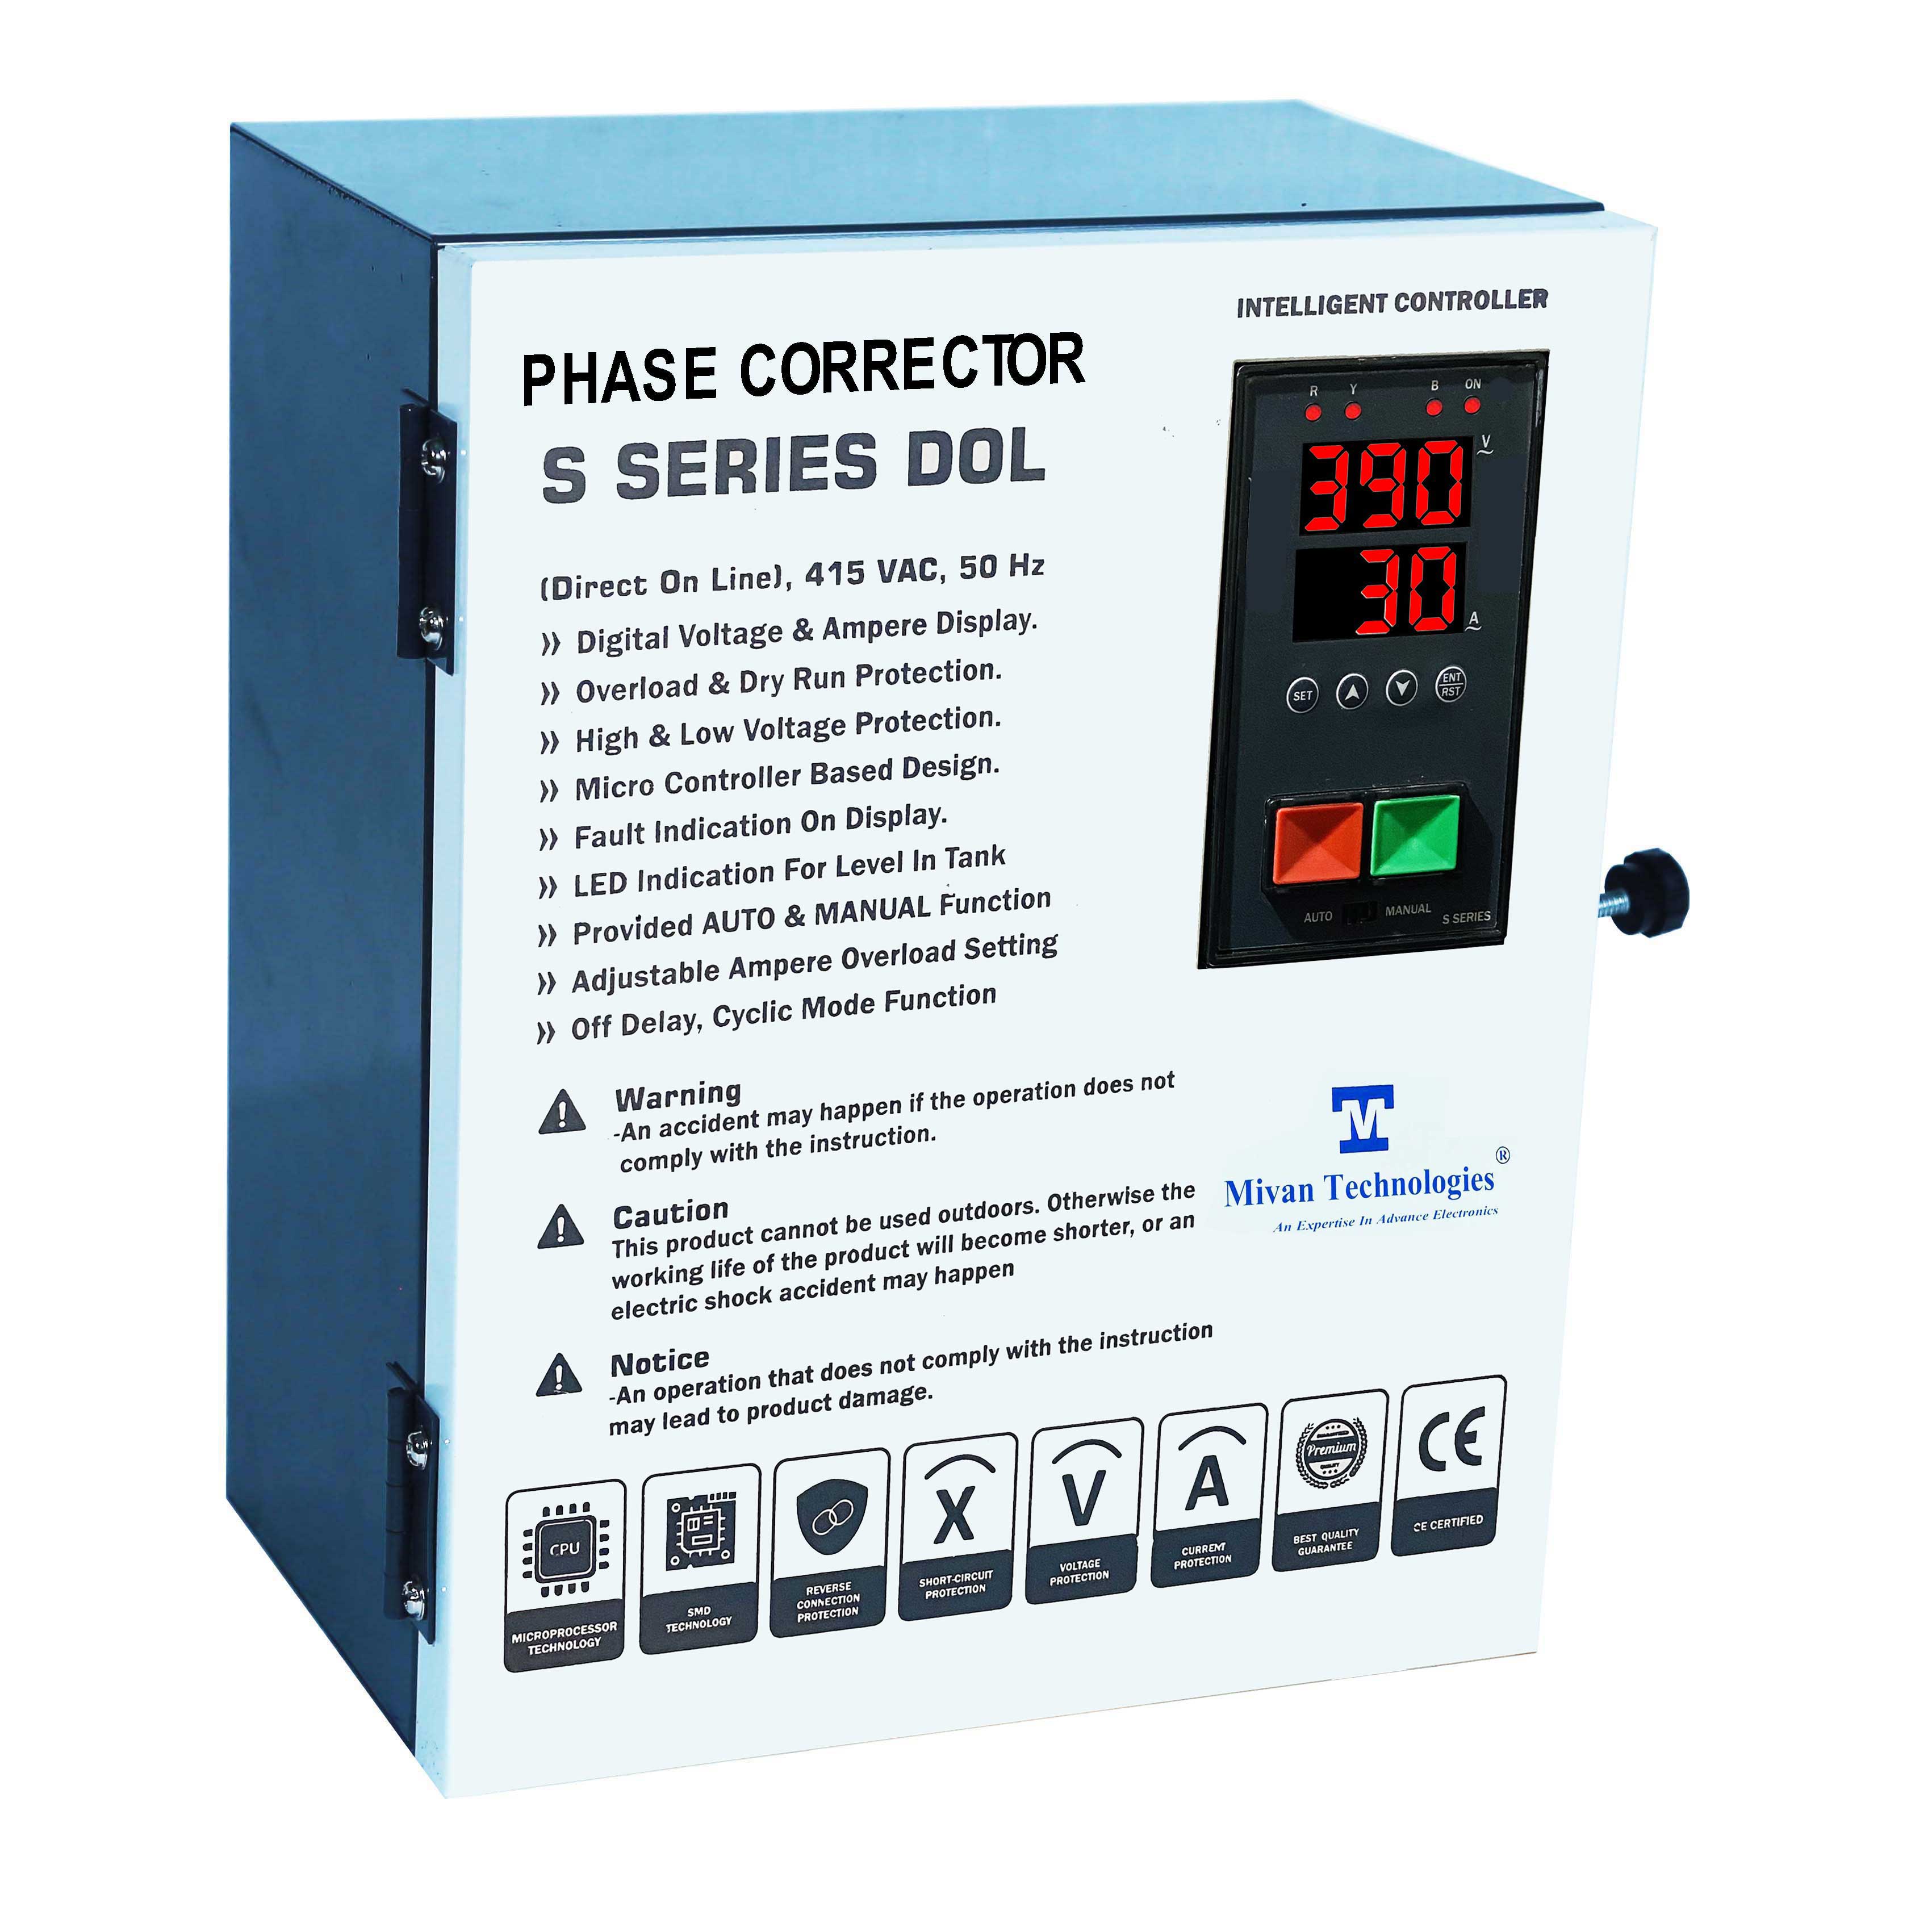 3 Phase corrector with dol starter it will give correct phase sequence R Y B at output even there is not a correct sequence at input with HV LV OL DRY protection SPP and auto switch